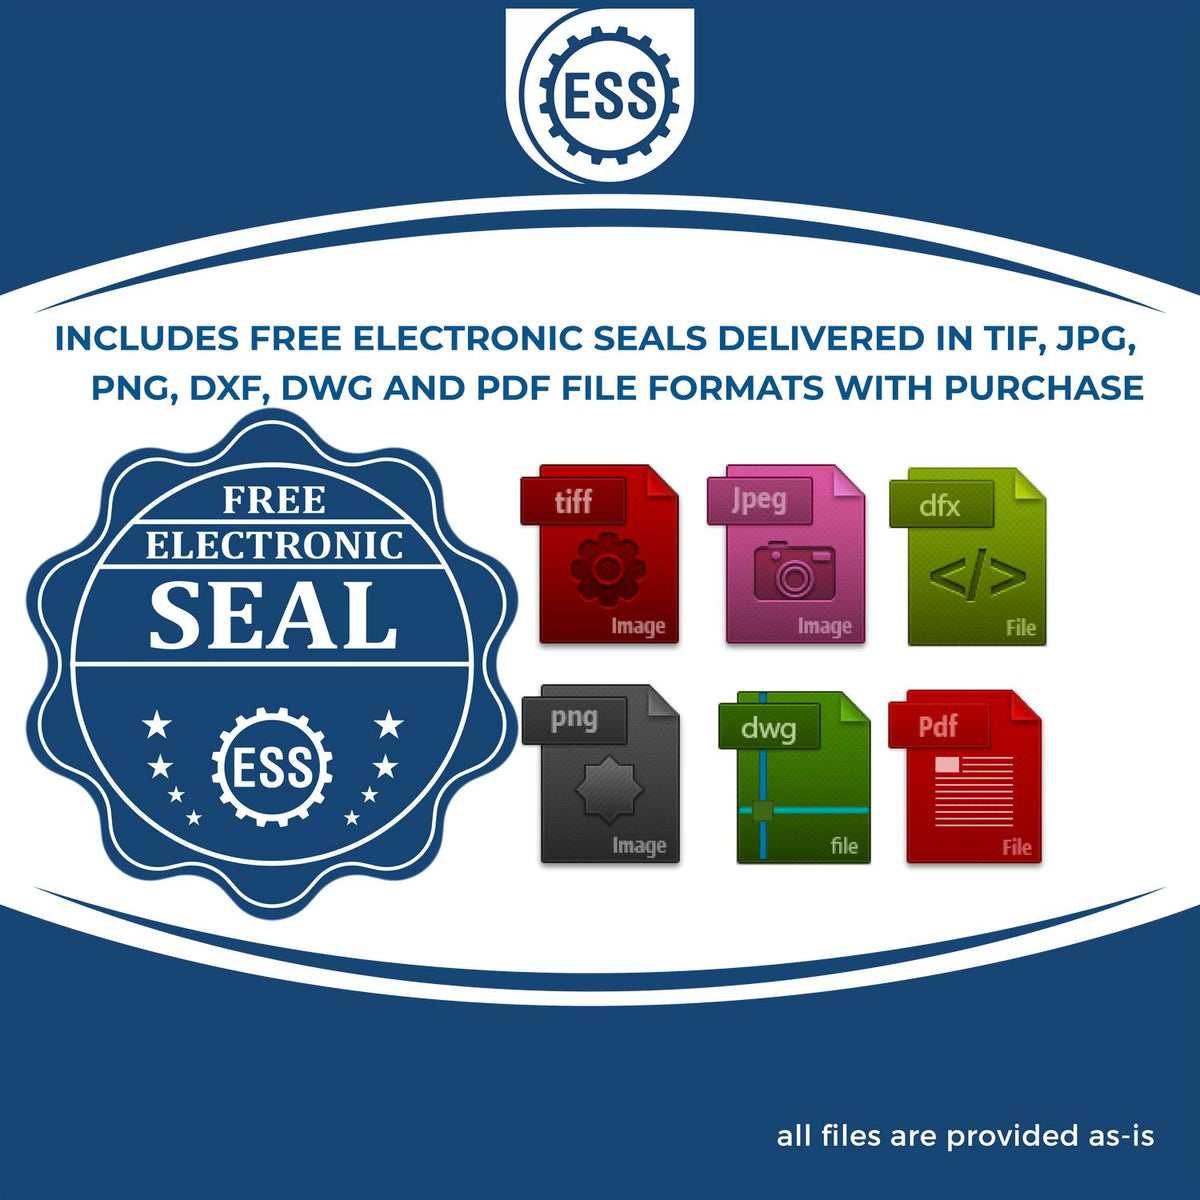 An infographic for the free electronic seal for the State of Nevada Extended Long Reach Geologist Seal illustrating the different file type icons such as DXF, DWG, TIF, JPG and PNG.